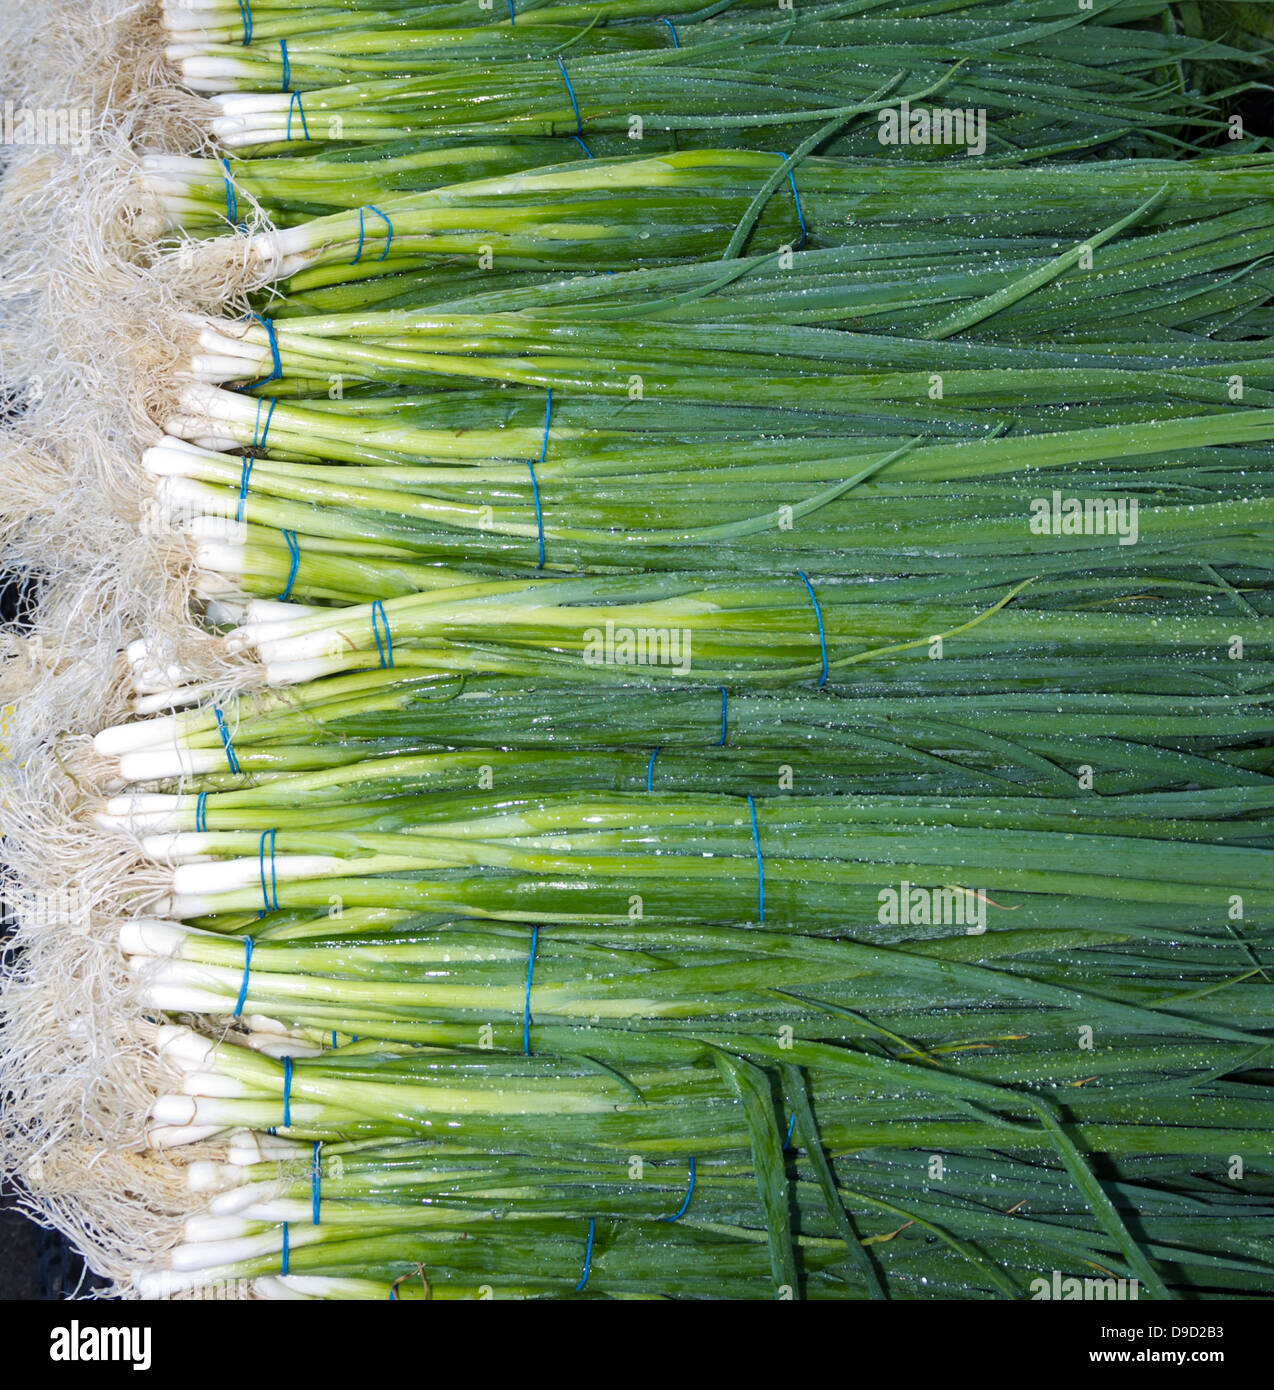 Freshly harvested green onions or scallions on display at the farmer's market Stock Photo